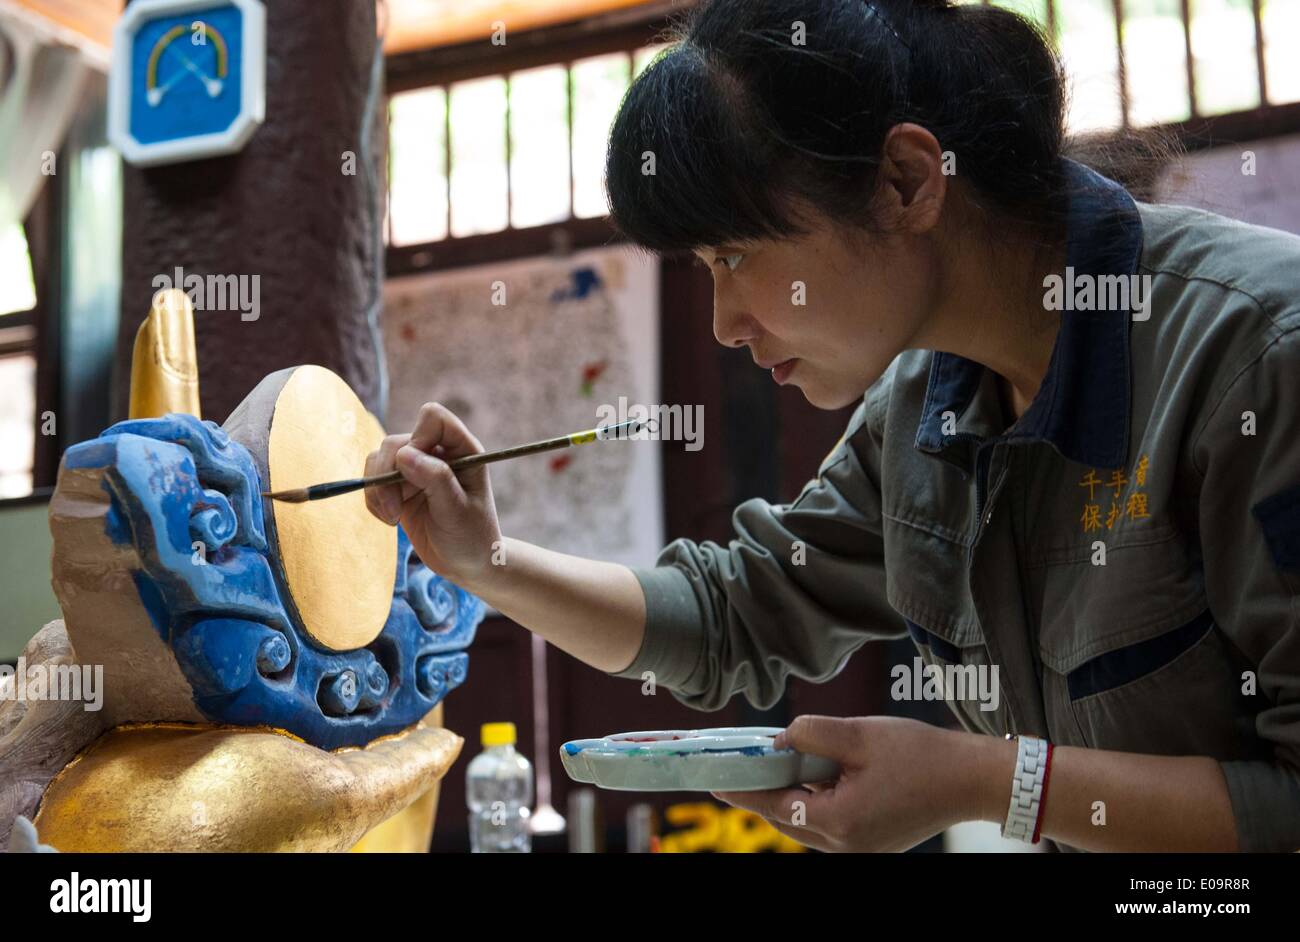 (140507) -- CHONGQING, May 7, 2014 (Xinhua) -- A staff member works during a restoration for a sculpture of Qianshou Guanyin (bodhisattva with a thousand hands) on Mount Baoding in Dazu District in the municipality of Chongqing, southwest China, May 7, 2014. The sculpture, carved in the cave with 7.7 meters high and 12.5 meters wide, could date back to Southern Song Dynasty (1127 to 1279). Over the centuries, the sculpture's color has faded, parts of the gold foil covering have peeled off, and cracks have appeared. And thus, a restoration project for the Buddhist statue has been launched since Stock Photo